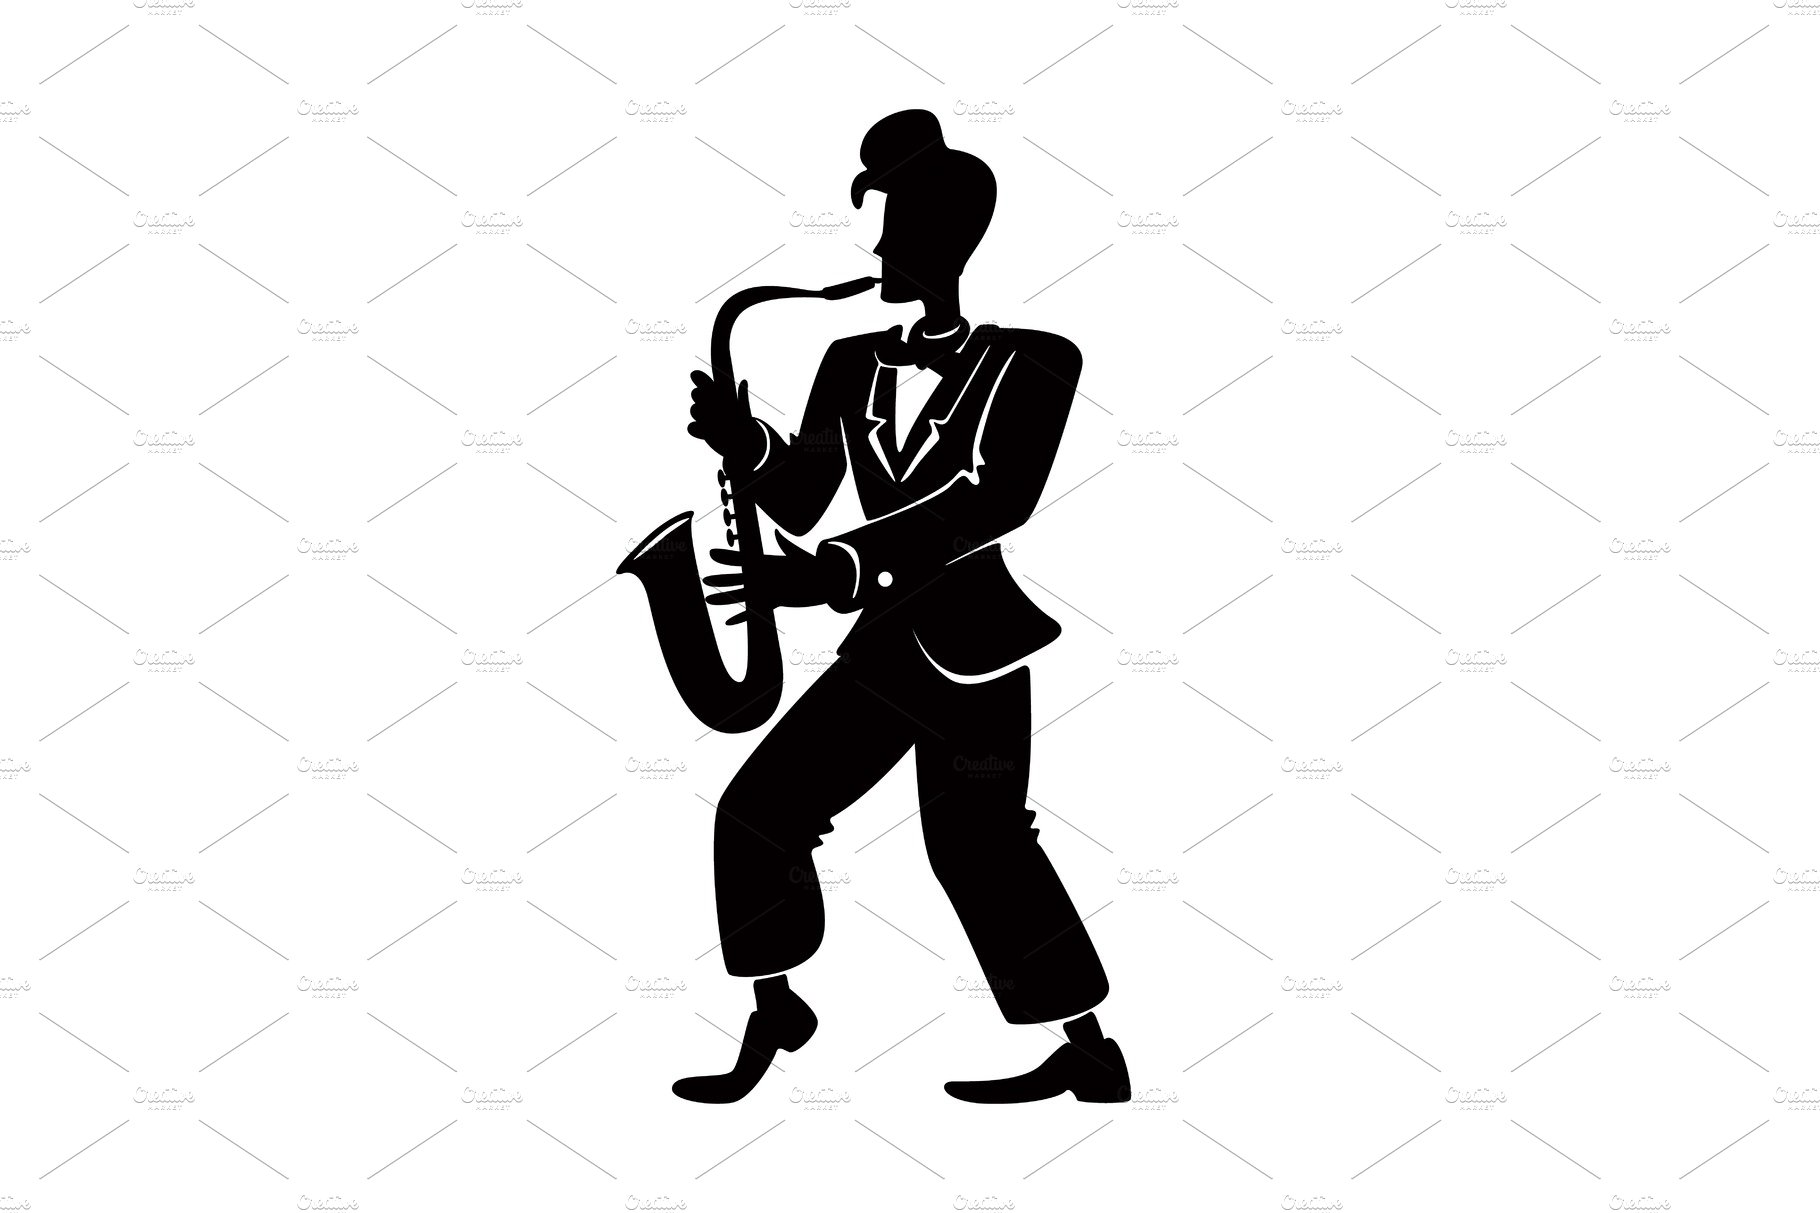 Jazz musician with saxophone cover image.